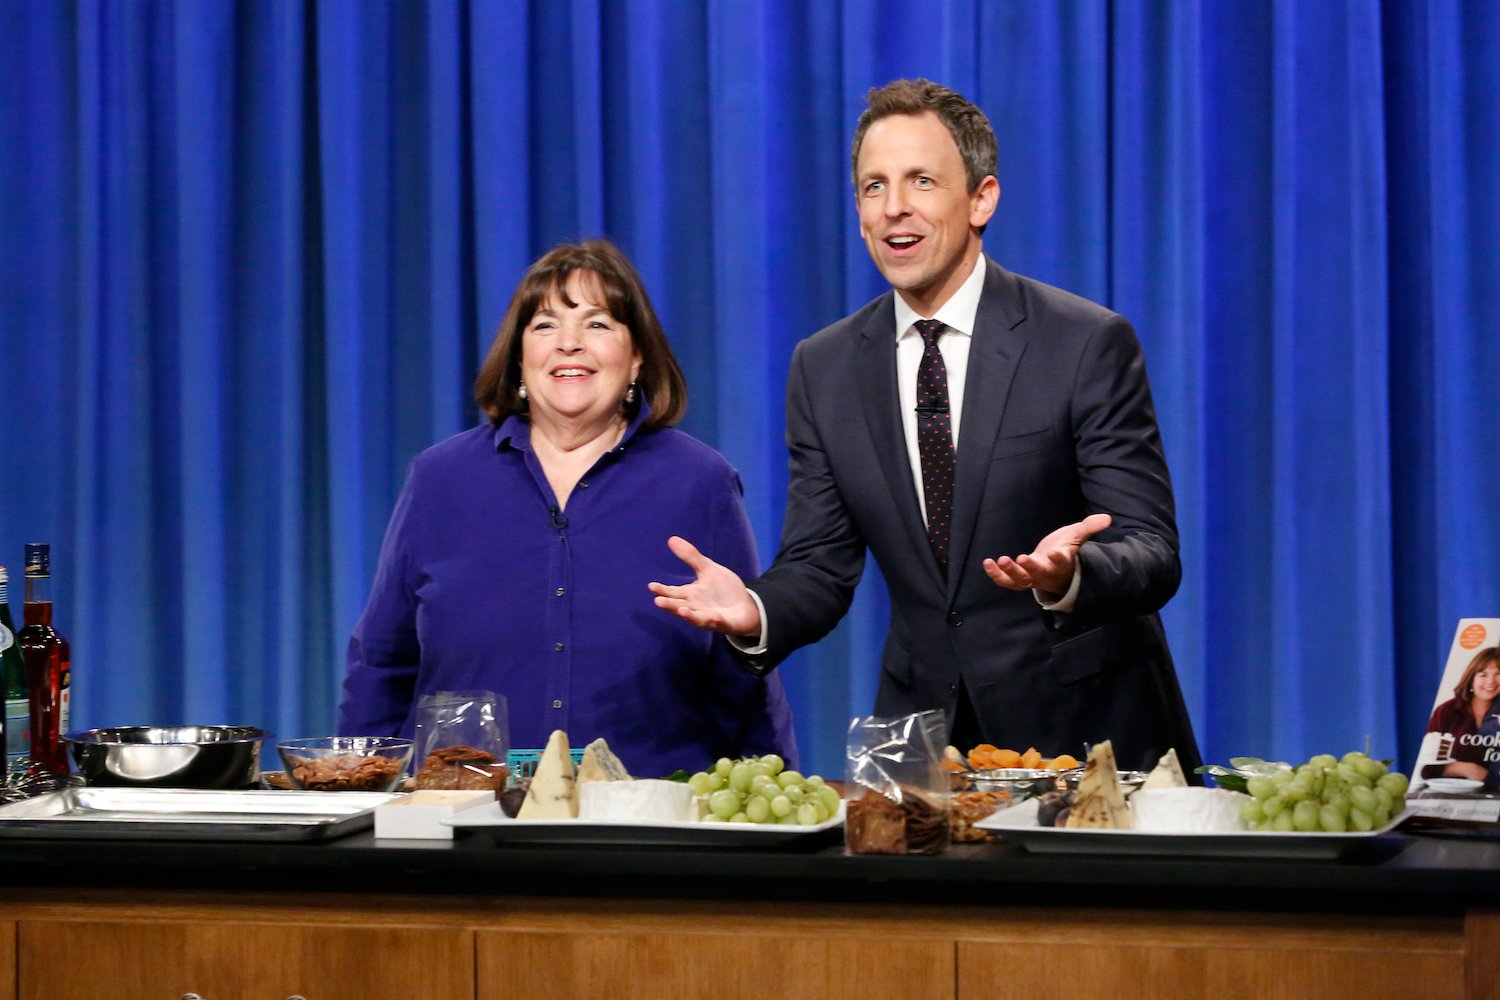 Ina Garten and host Seth Meyers during a cooking segment on October 27, 2016 on Late Night With Seth Meyers